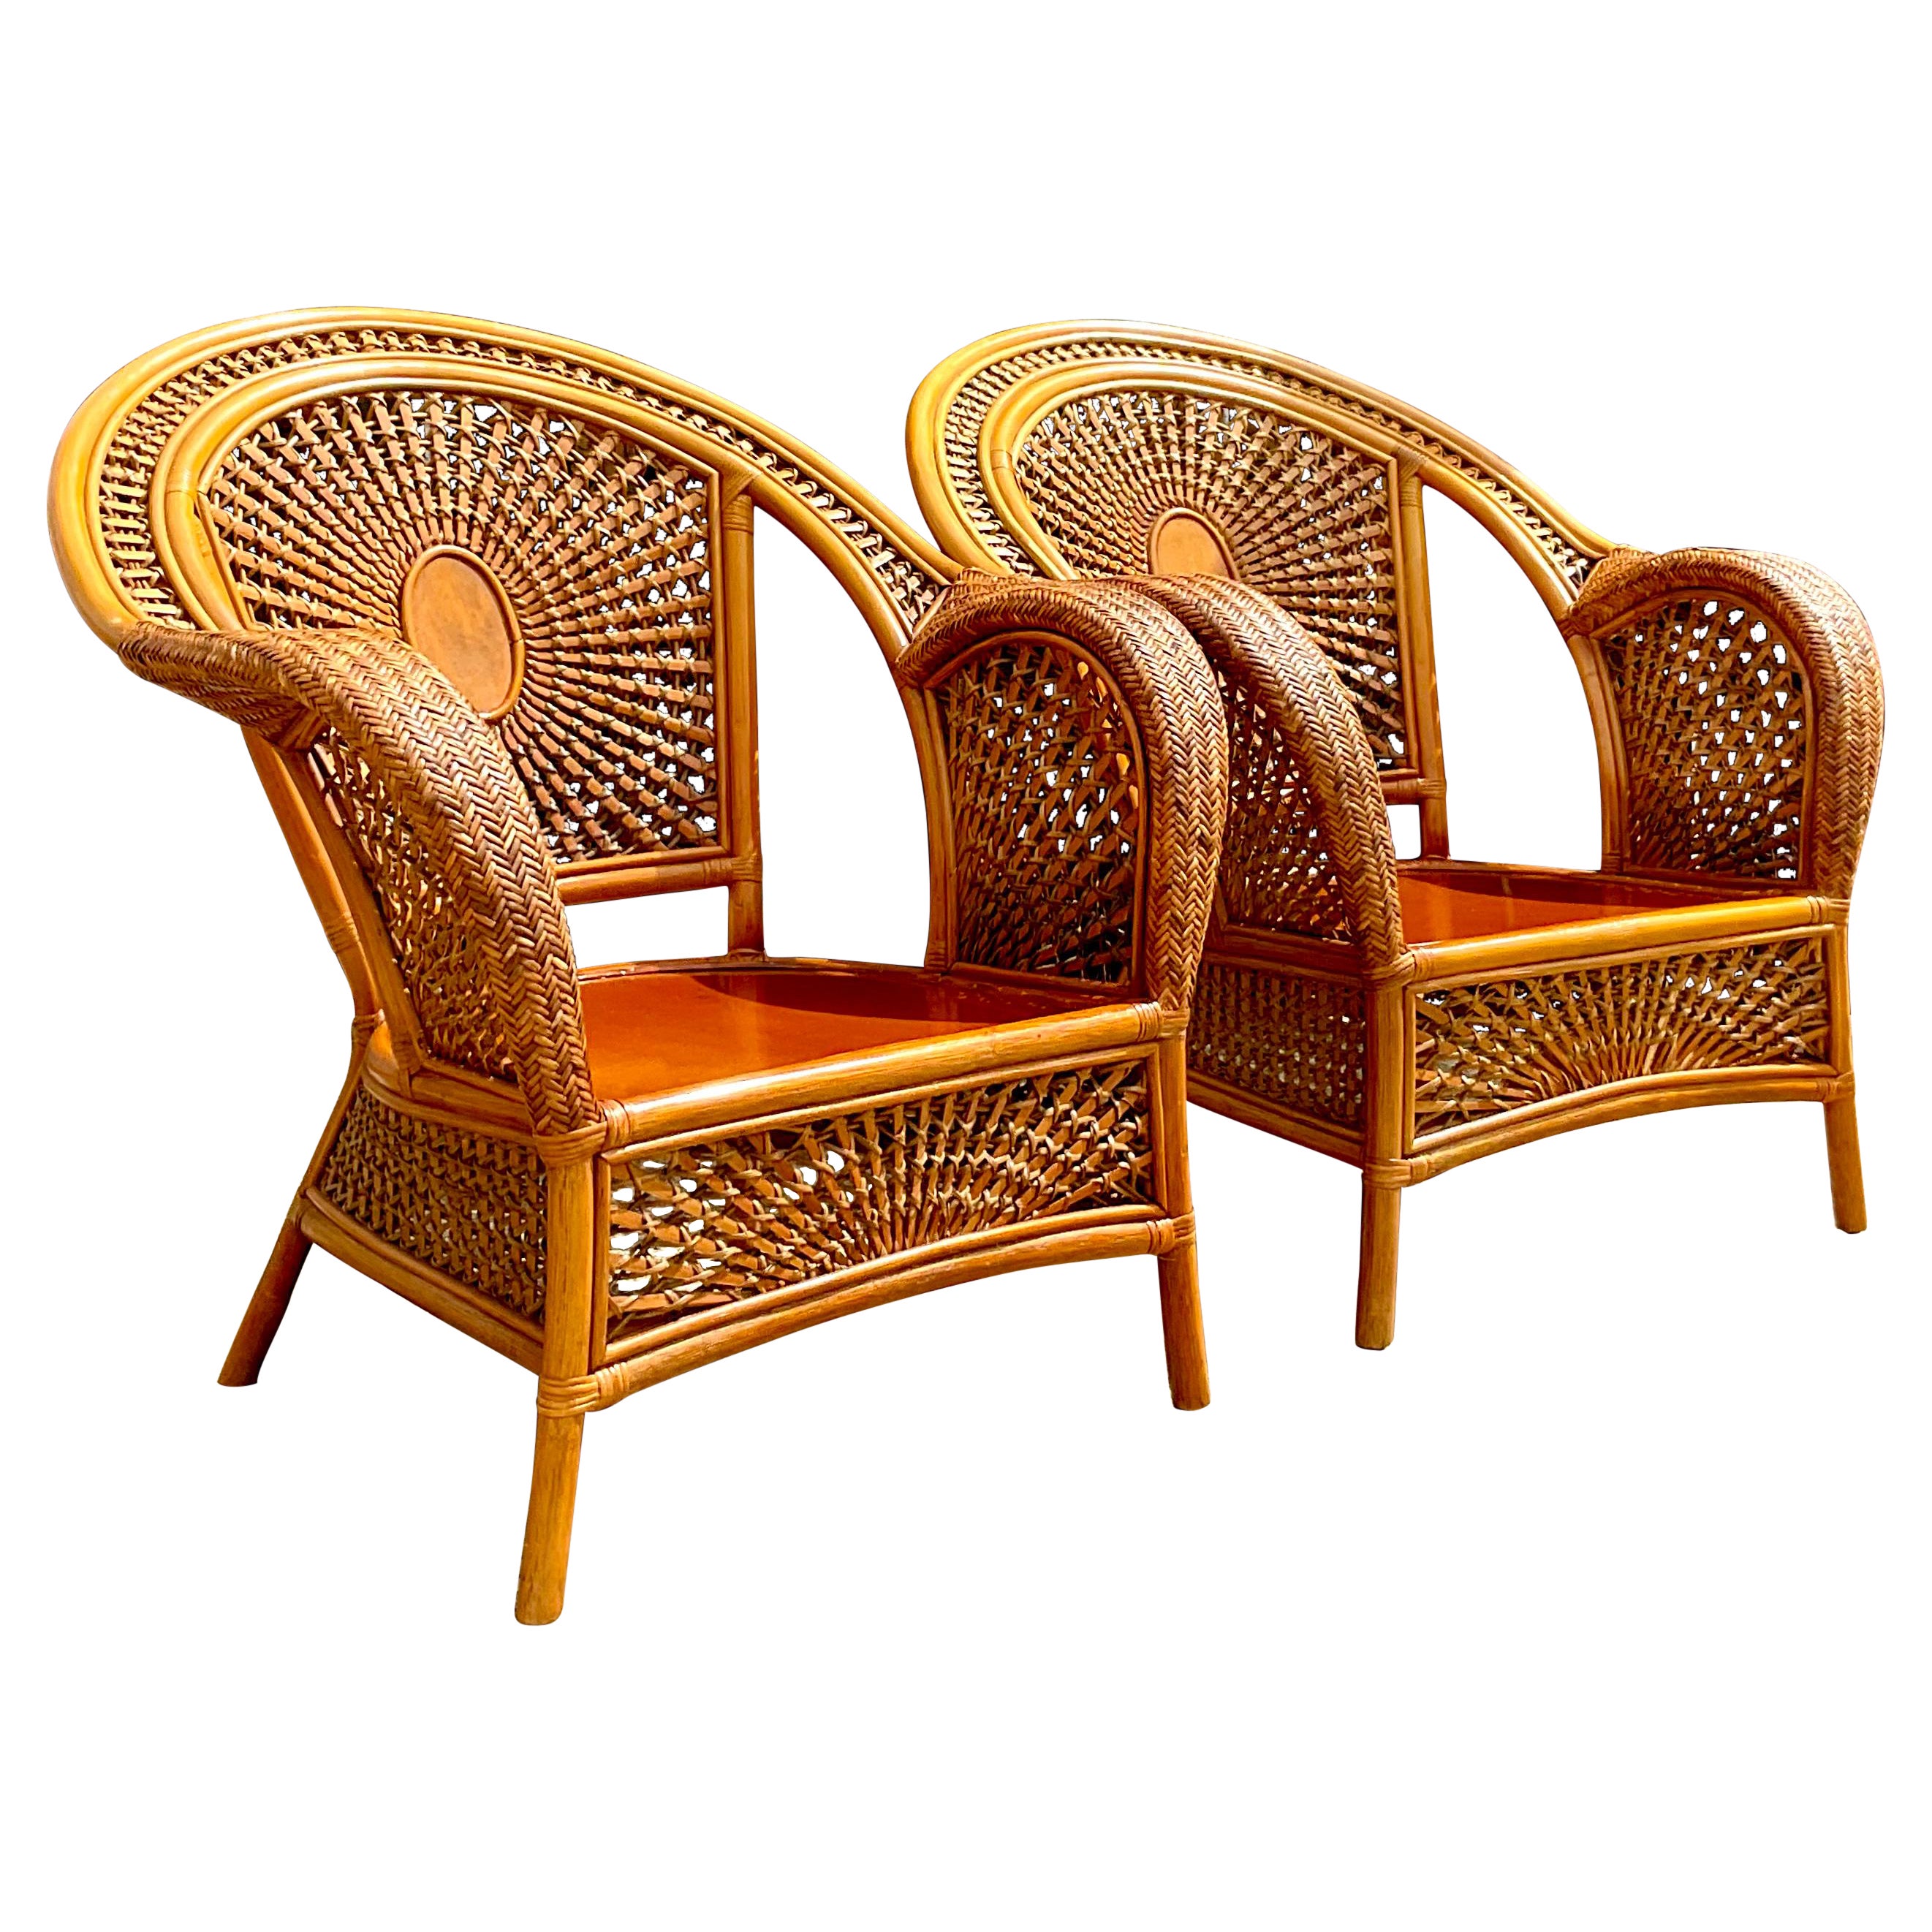 Vintage Coastal Woven Rattan Spider Wed Lounge Chairs, a Pair